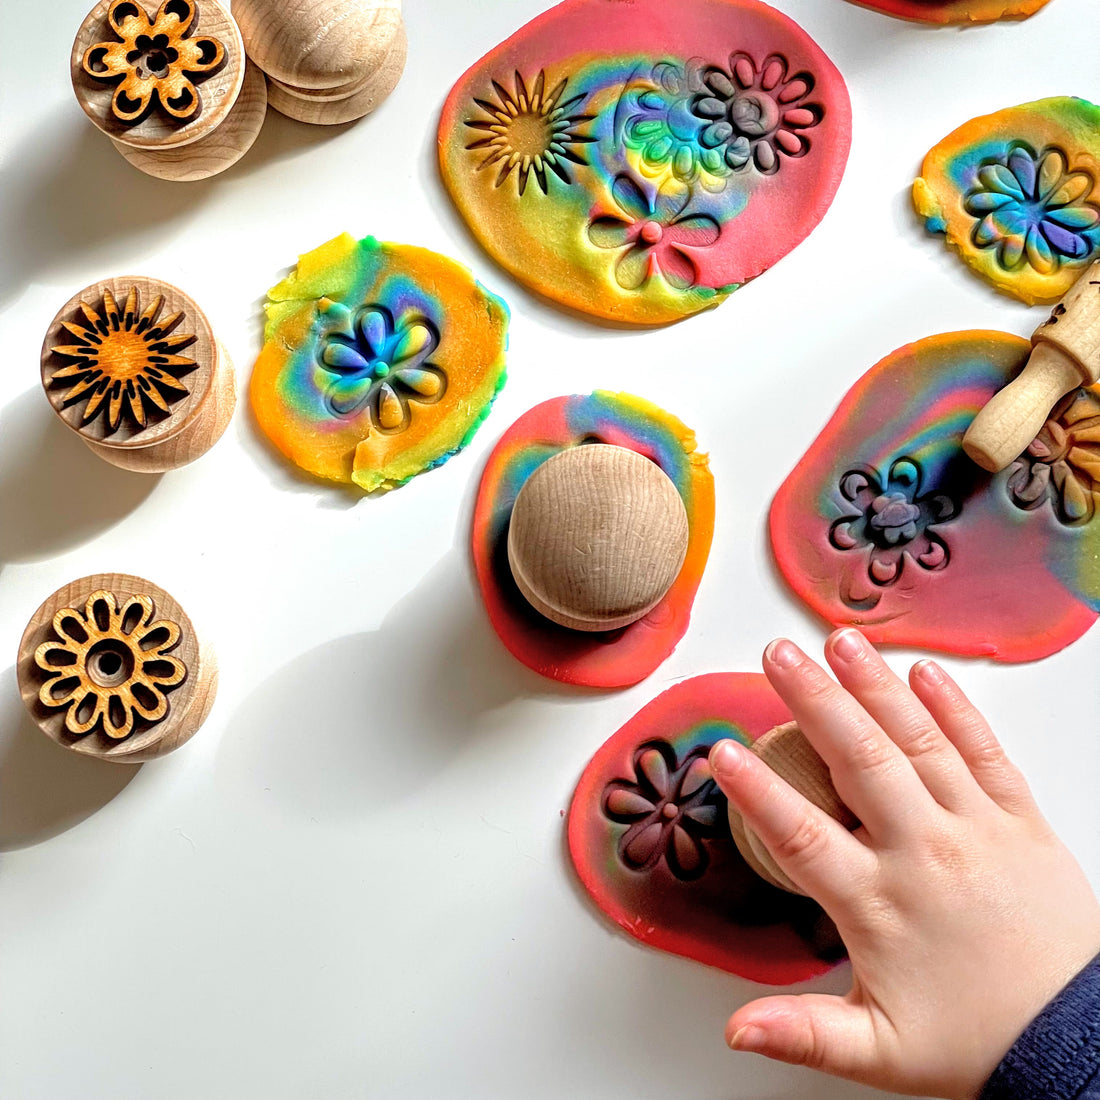 Toddler hand using a playdough stamp to create flower patterns in rainbow colored playdough